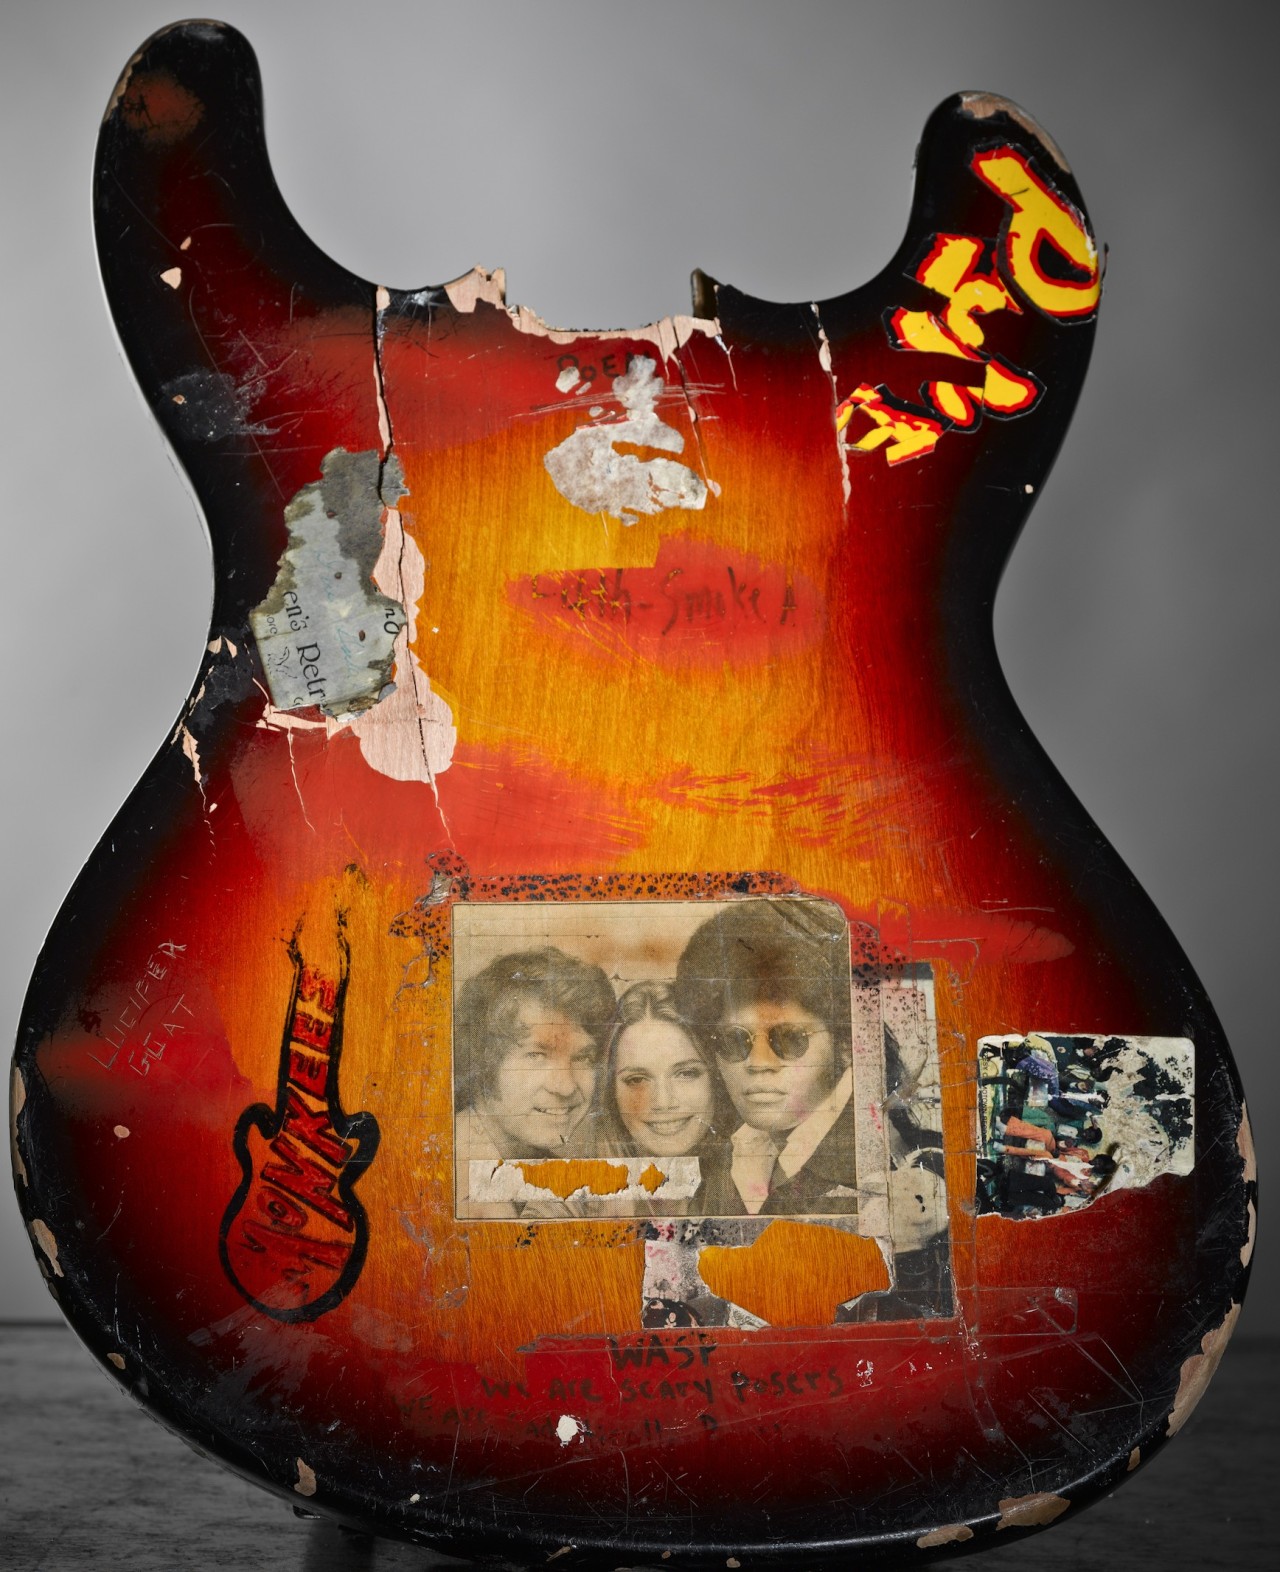 nirvananews:<br /><br />
“ Kurt Cobain’s first smashed guitar from the Evergreen State College, 1988.<br /><br />
Click here to follow Nirvana on Instagram.<br /><br />
”